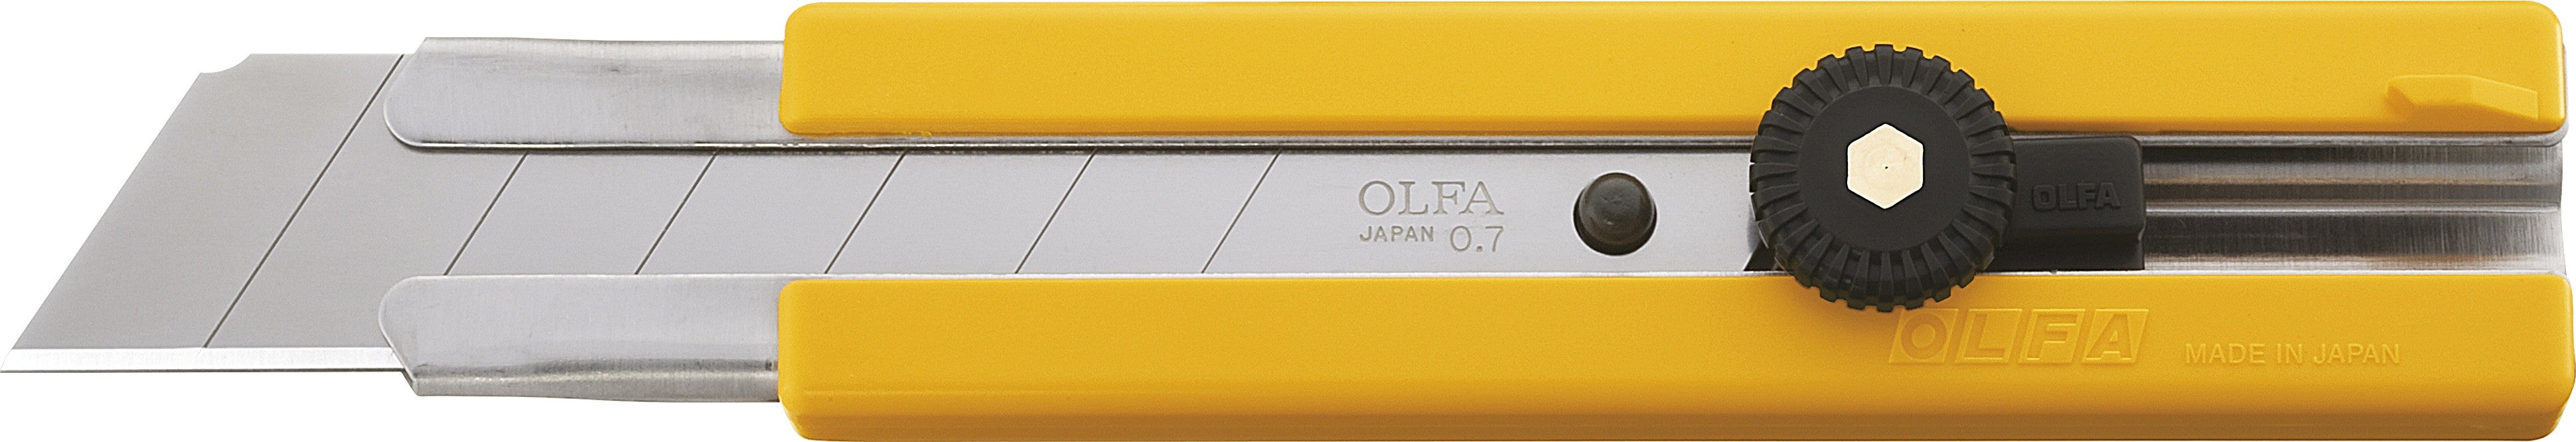 Olfa cutter 25 mm c/rotella art. h-1 ITW CONSTRUCTION PRODUCT